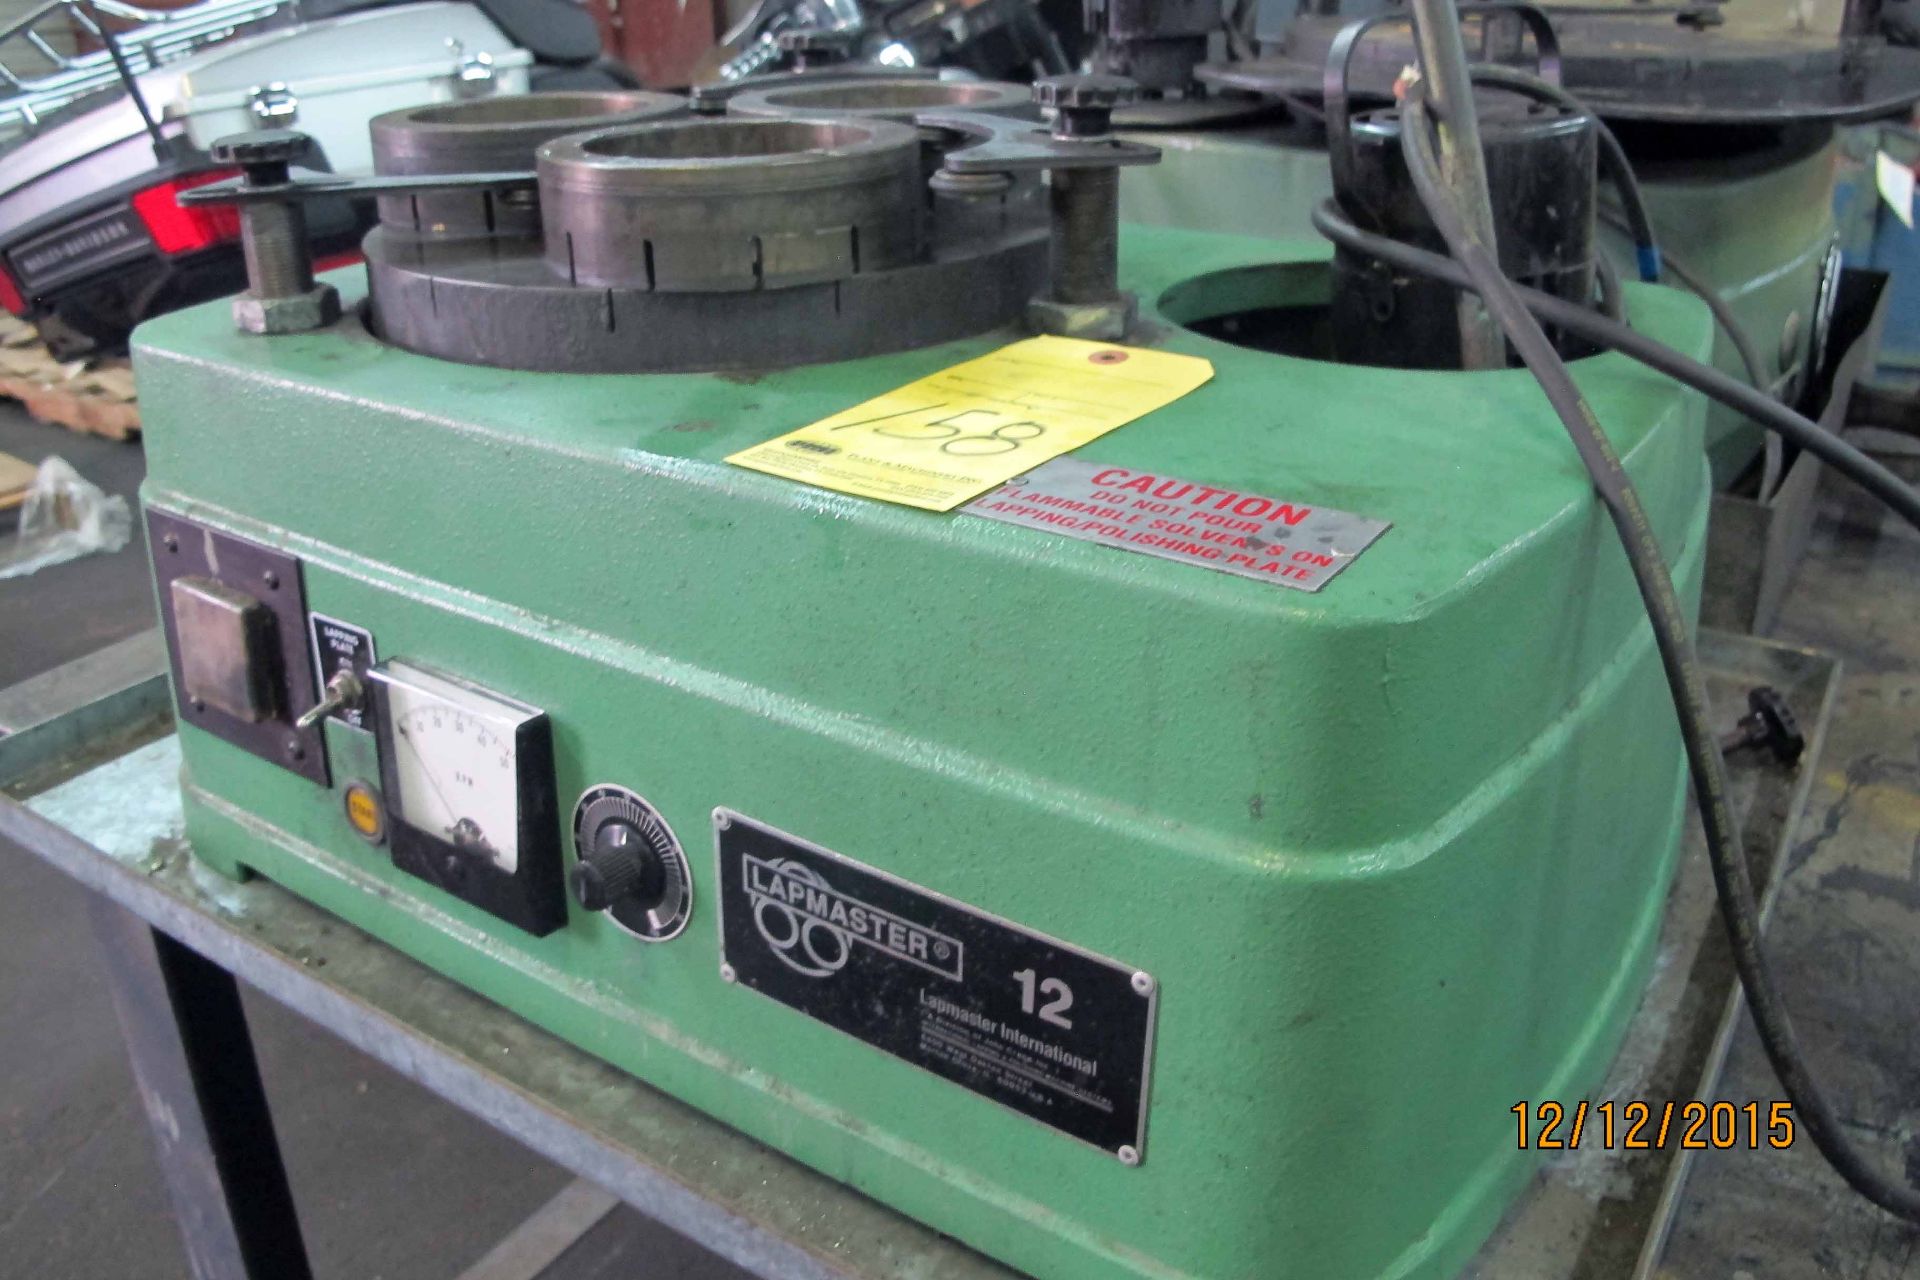 LAPPING MACHINE, LAPMASTER MDL. 12, 12" O.D. x 3" I.D. lap plate, (3) conditioning rings 5-5/8" O.D.